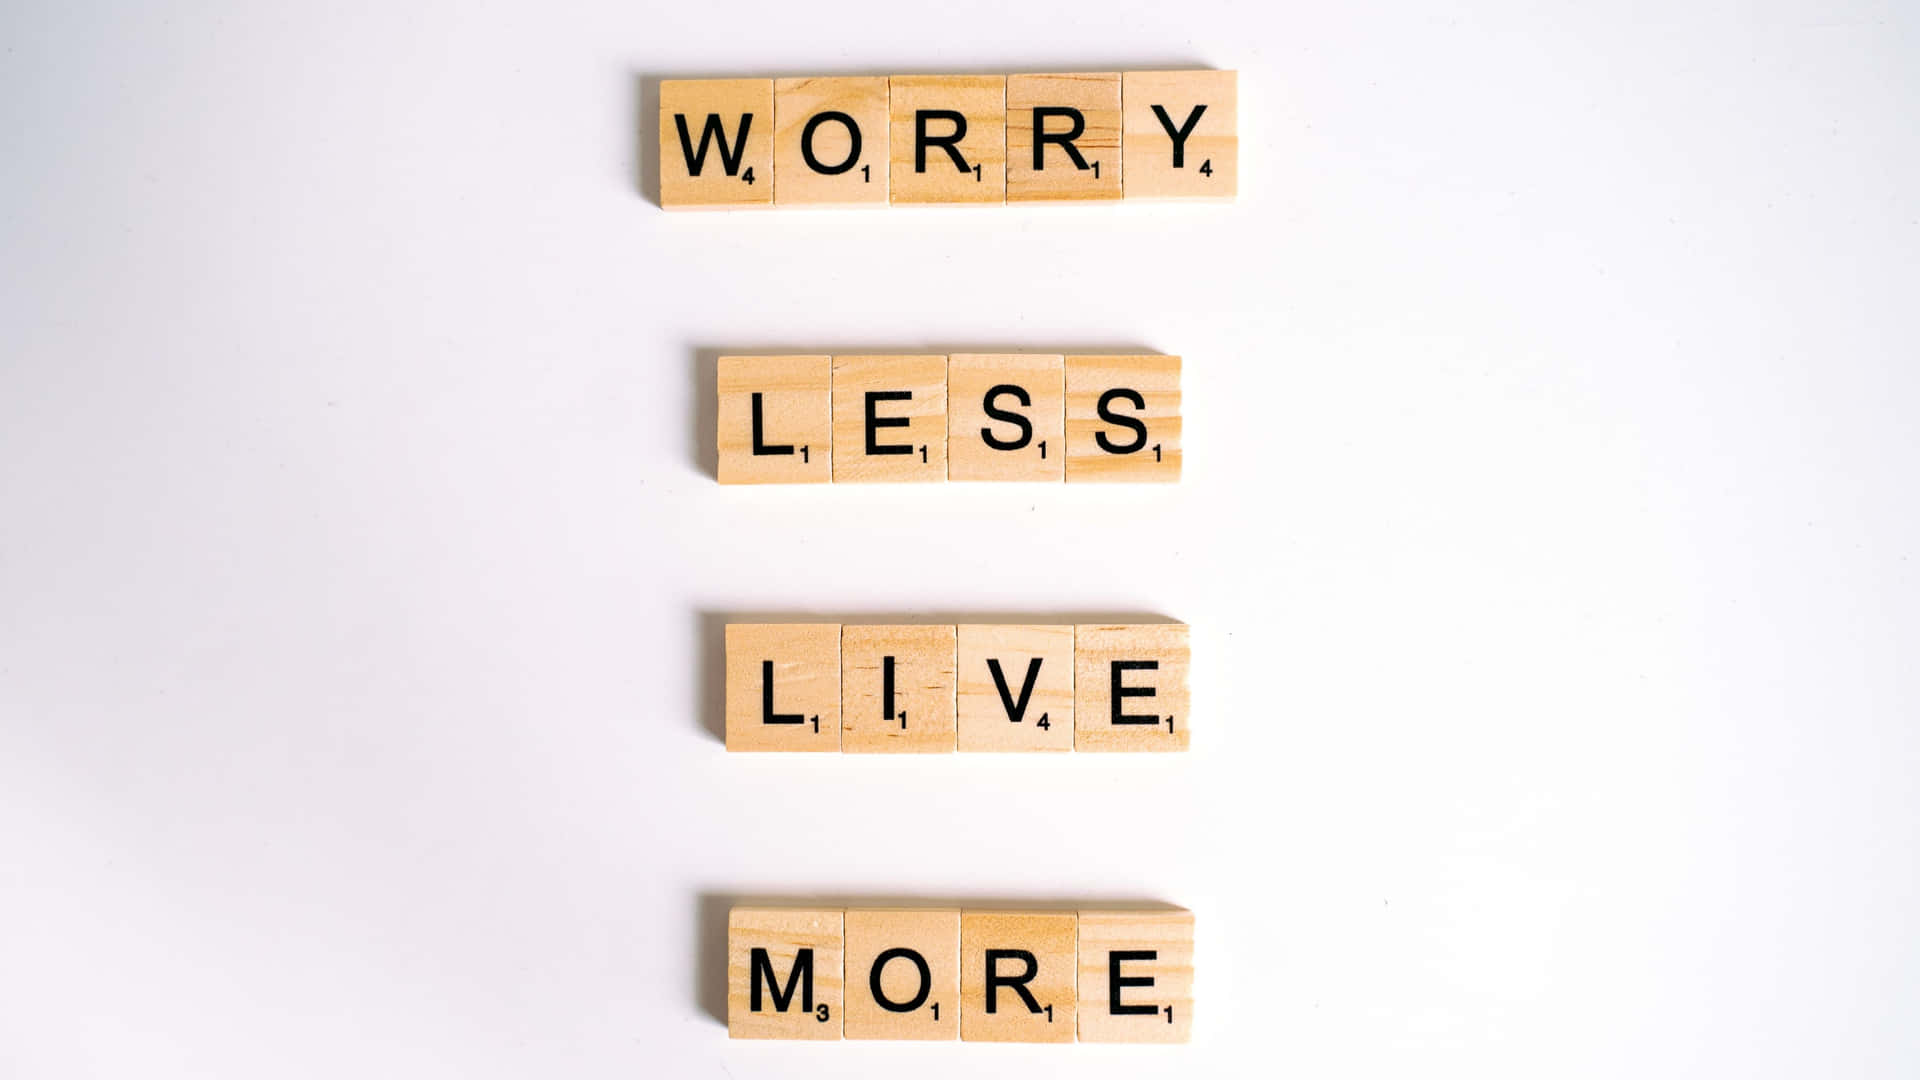 Wooden Scrabble Tiles With Inspirational Quote 4K Monitor Wallpaper